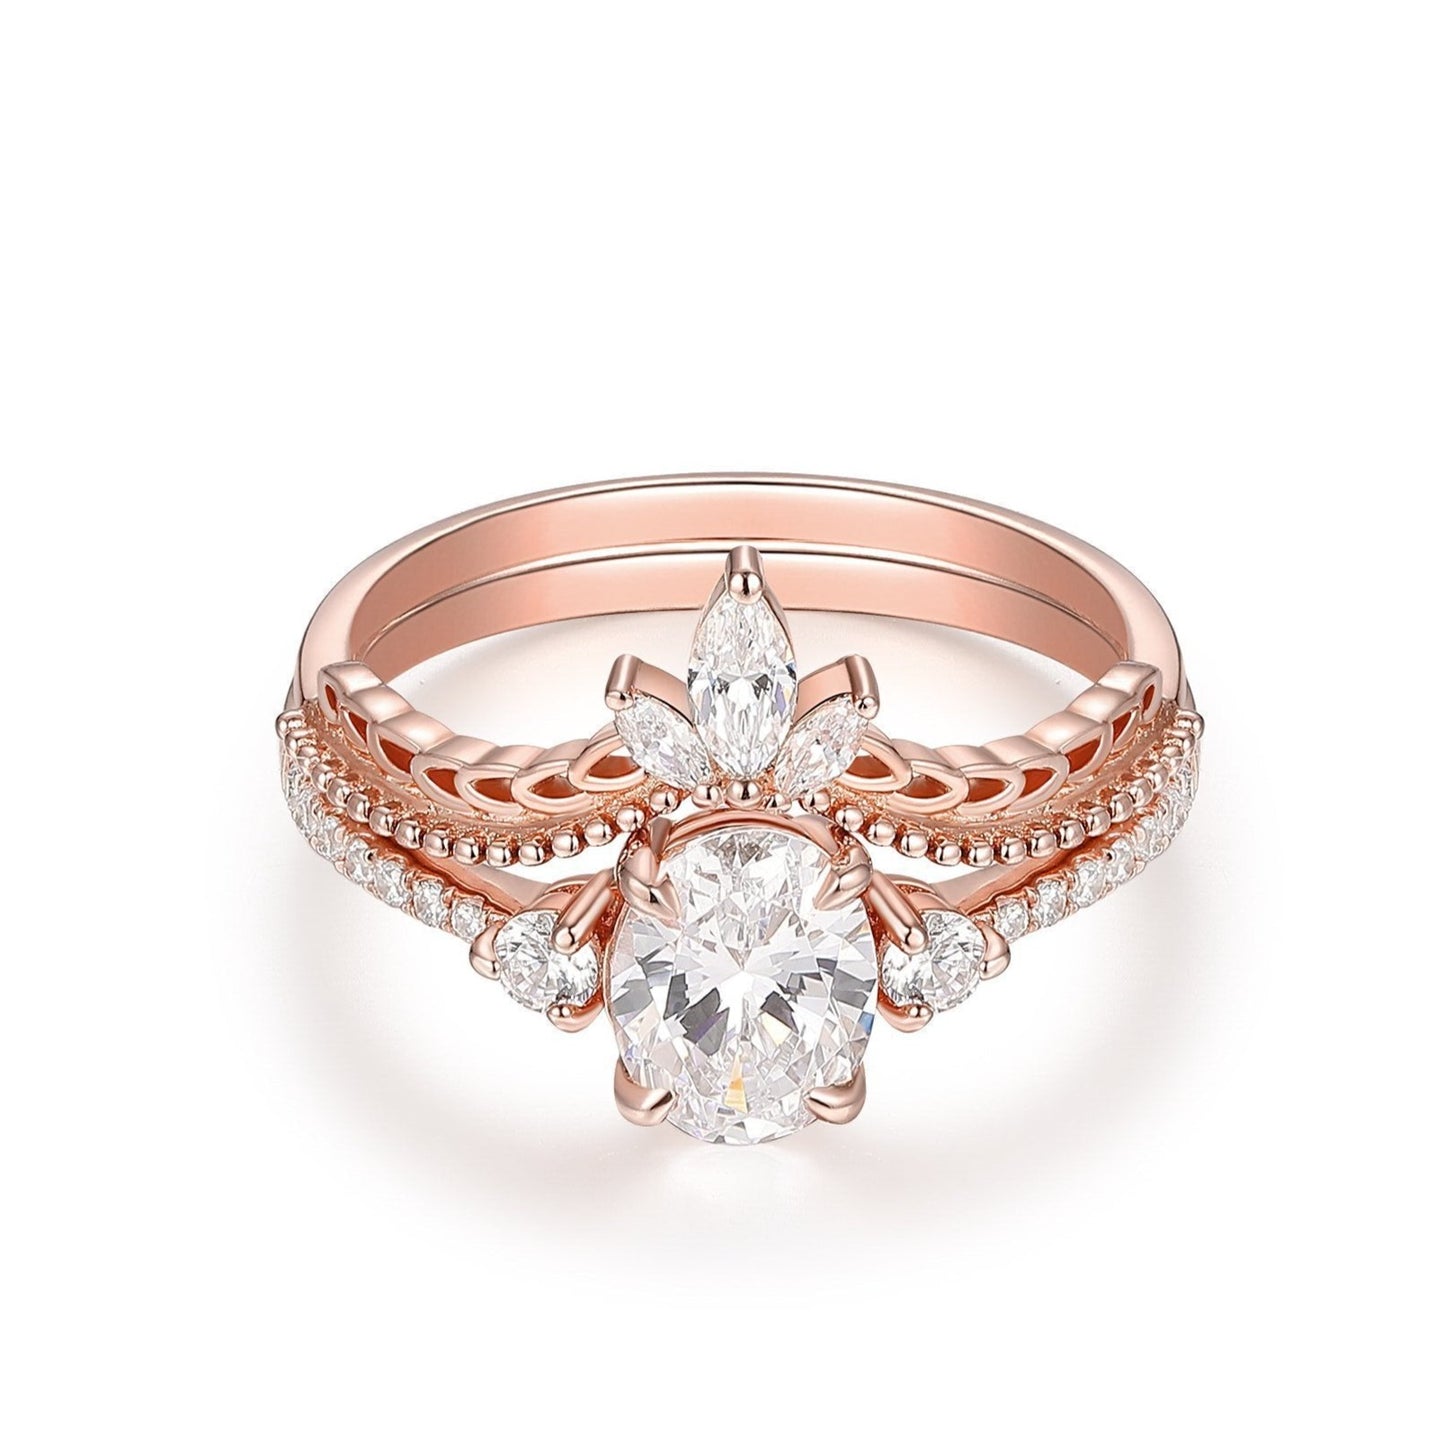 14k Rose Gold Moissanite Bridal Sets, Art Deco 1.5CT Oval Cut Moissanite Tapered Band Engagement Ring For Her, Vintage Curved Shaped Wedding Band